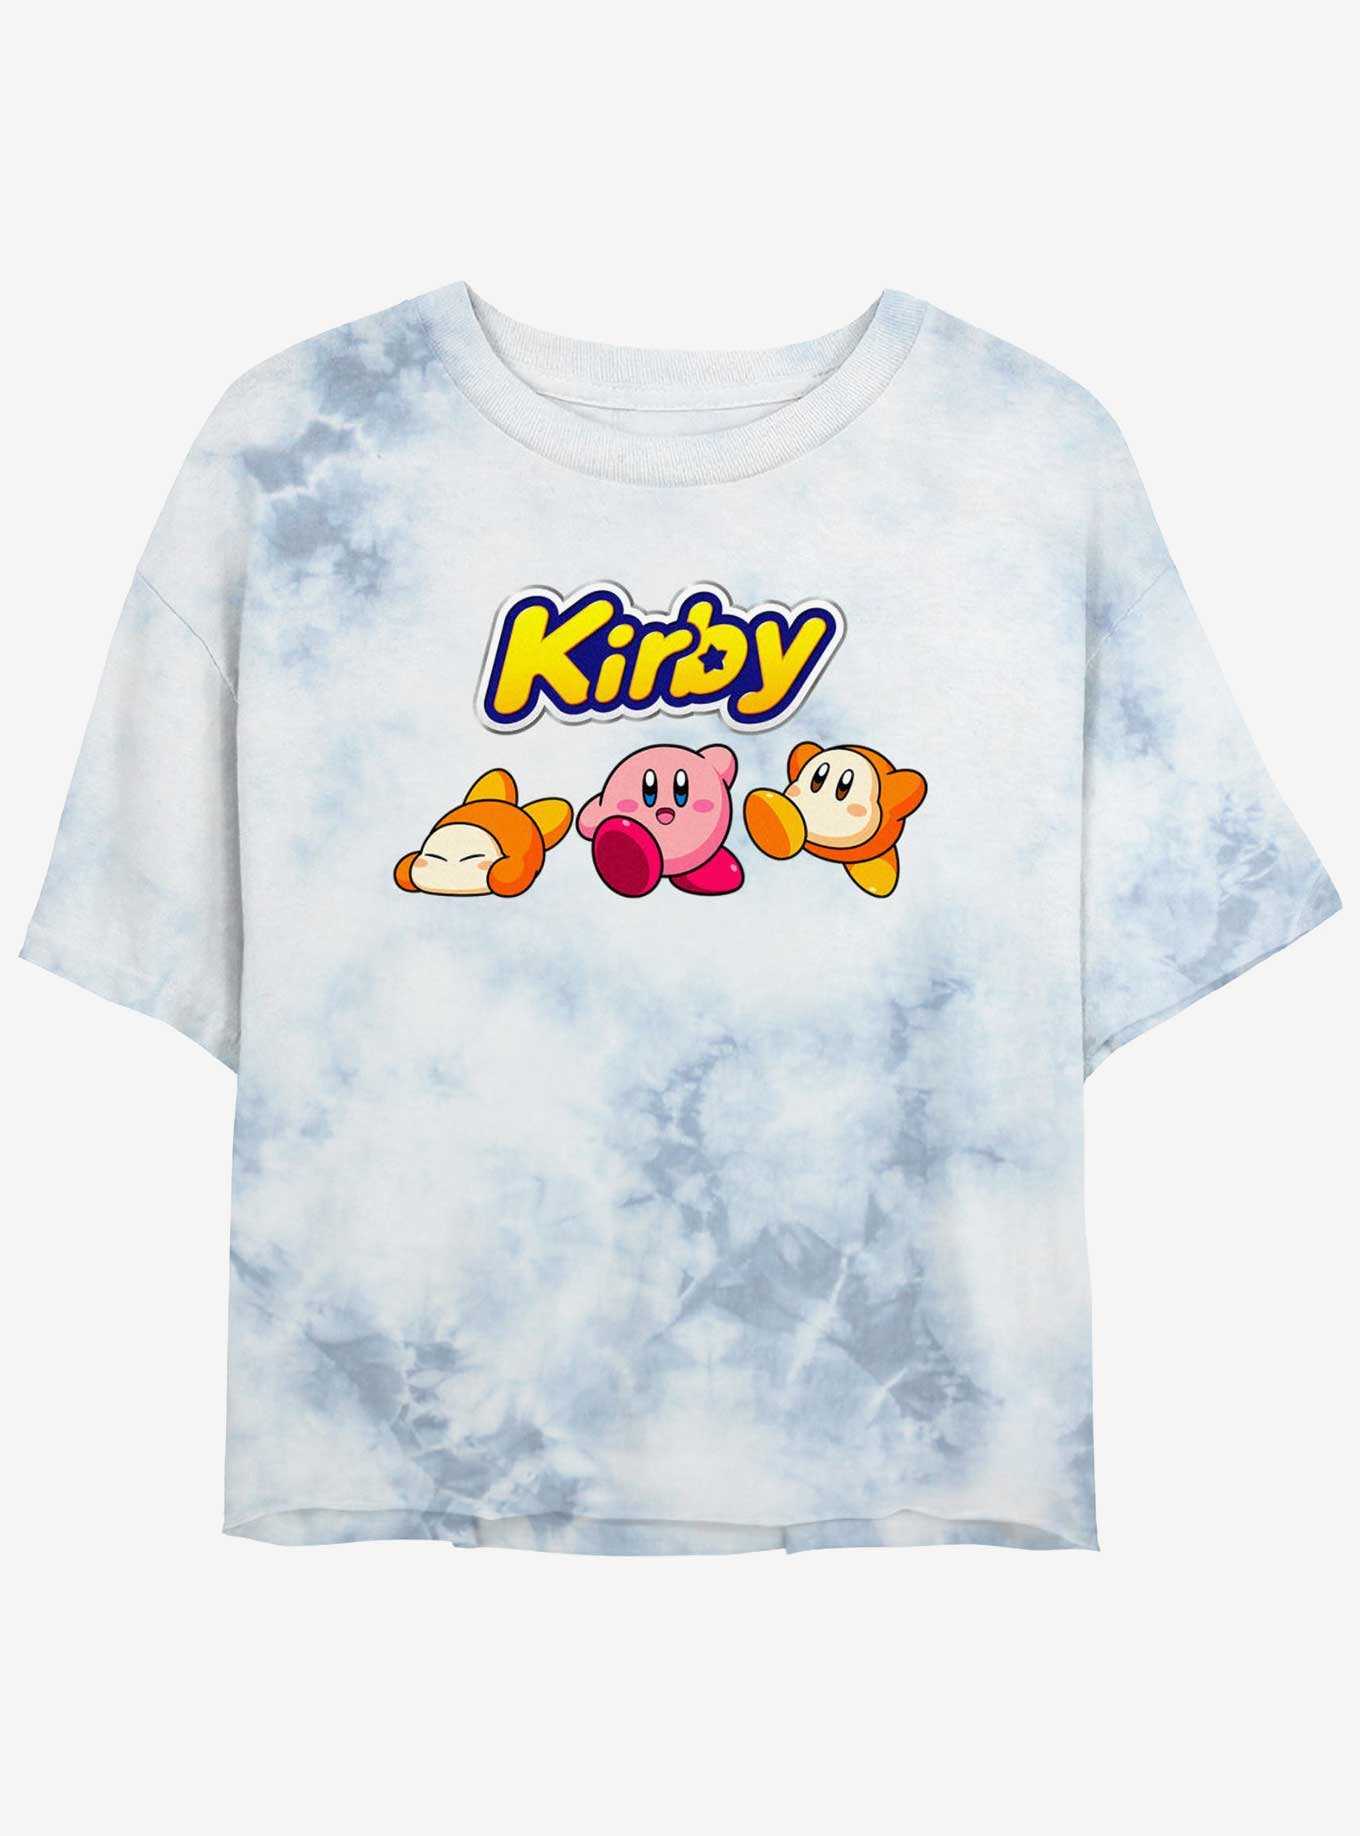 Kirby and Waddle Dee Logo Tie-Dye Girls Crop T-Shirt, , hi-res